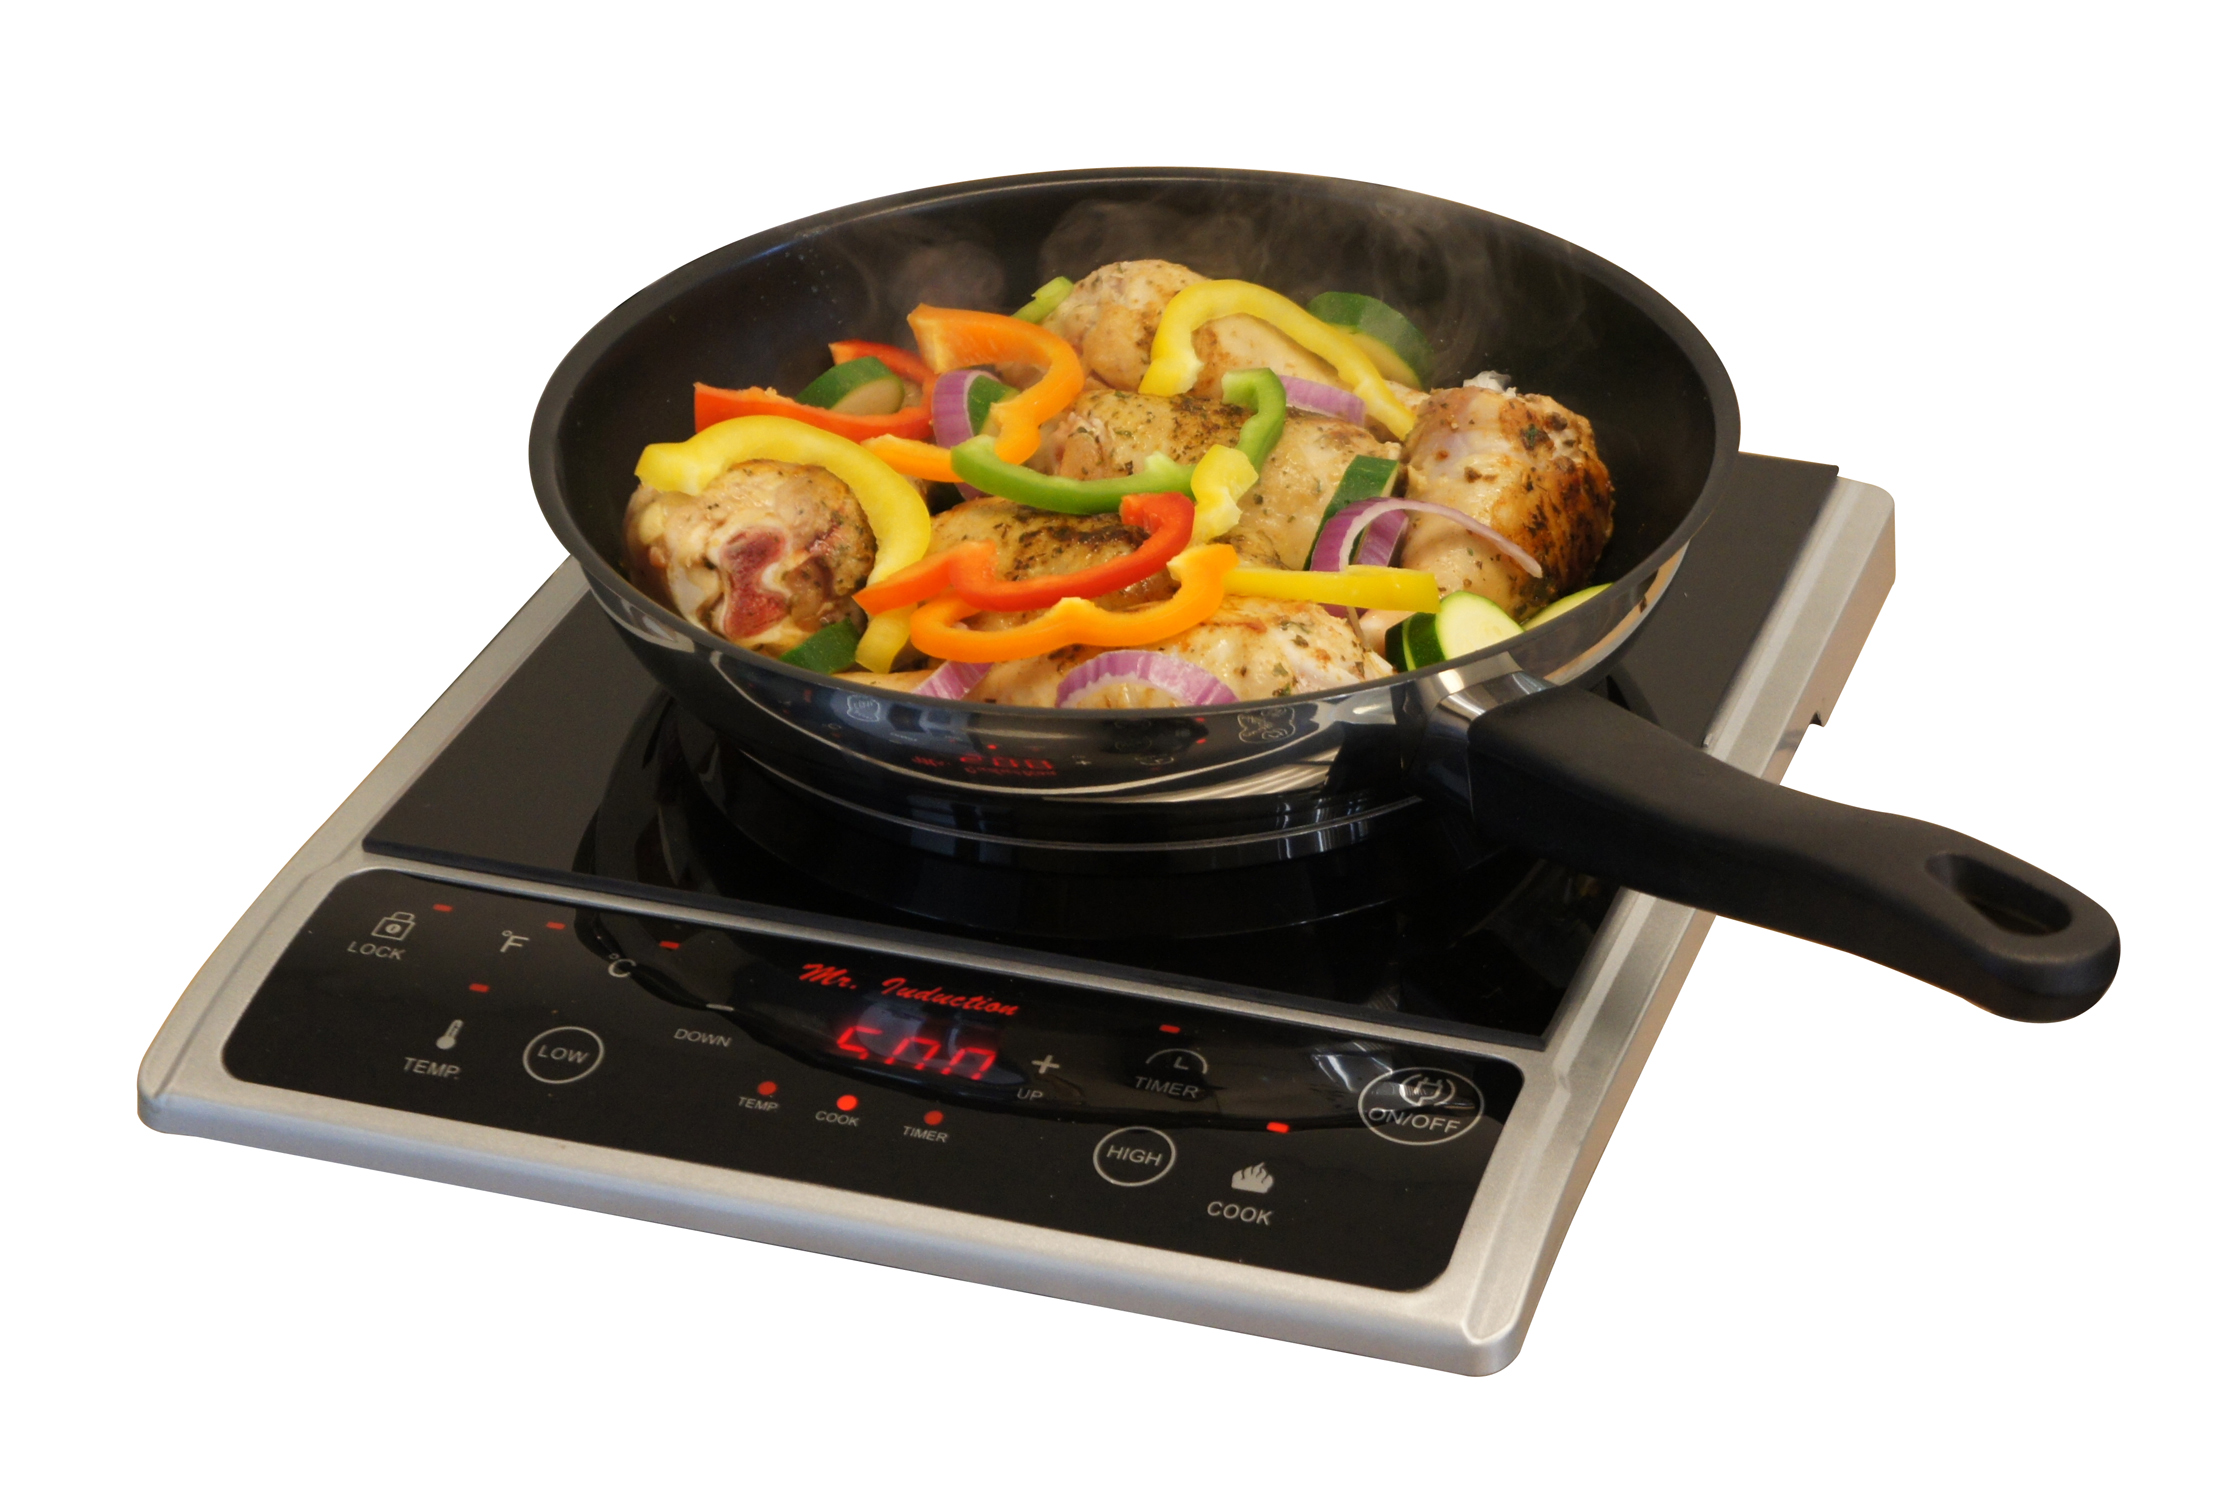 SPT 1,300W Induction Cooktop, Silver - image 3 of 4